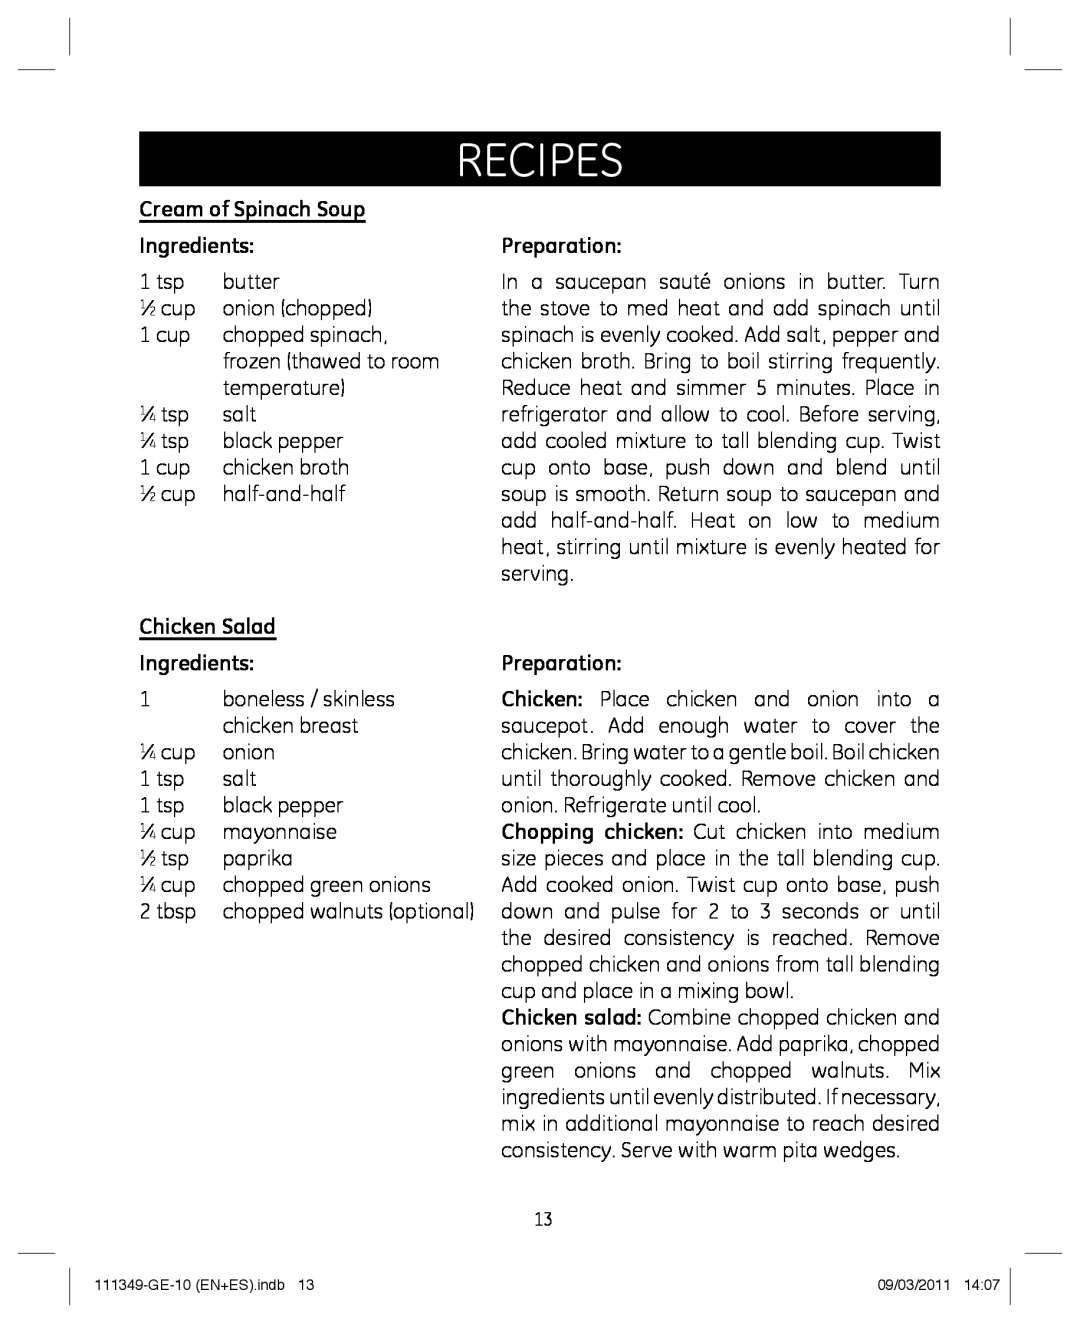 GE 898679 manual Cream of Spinach Soup, Chicken Salad, recipes, Ingredients, Preparation 